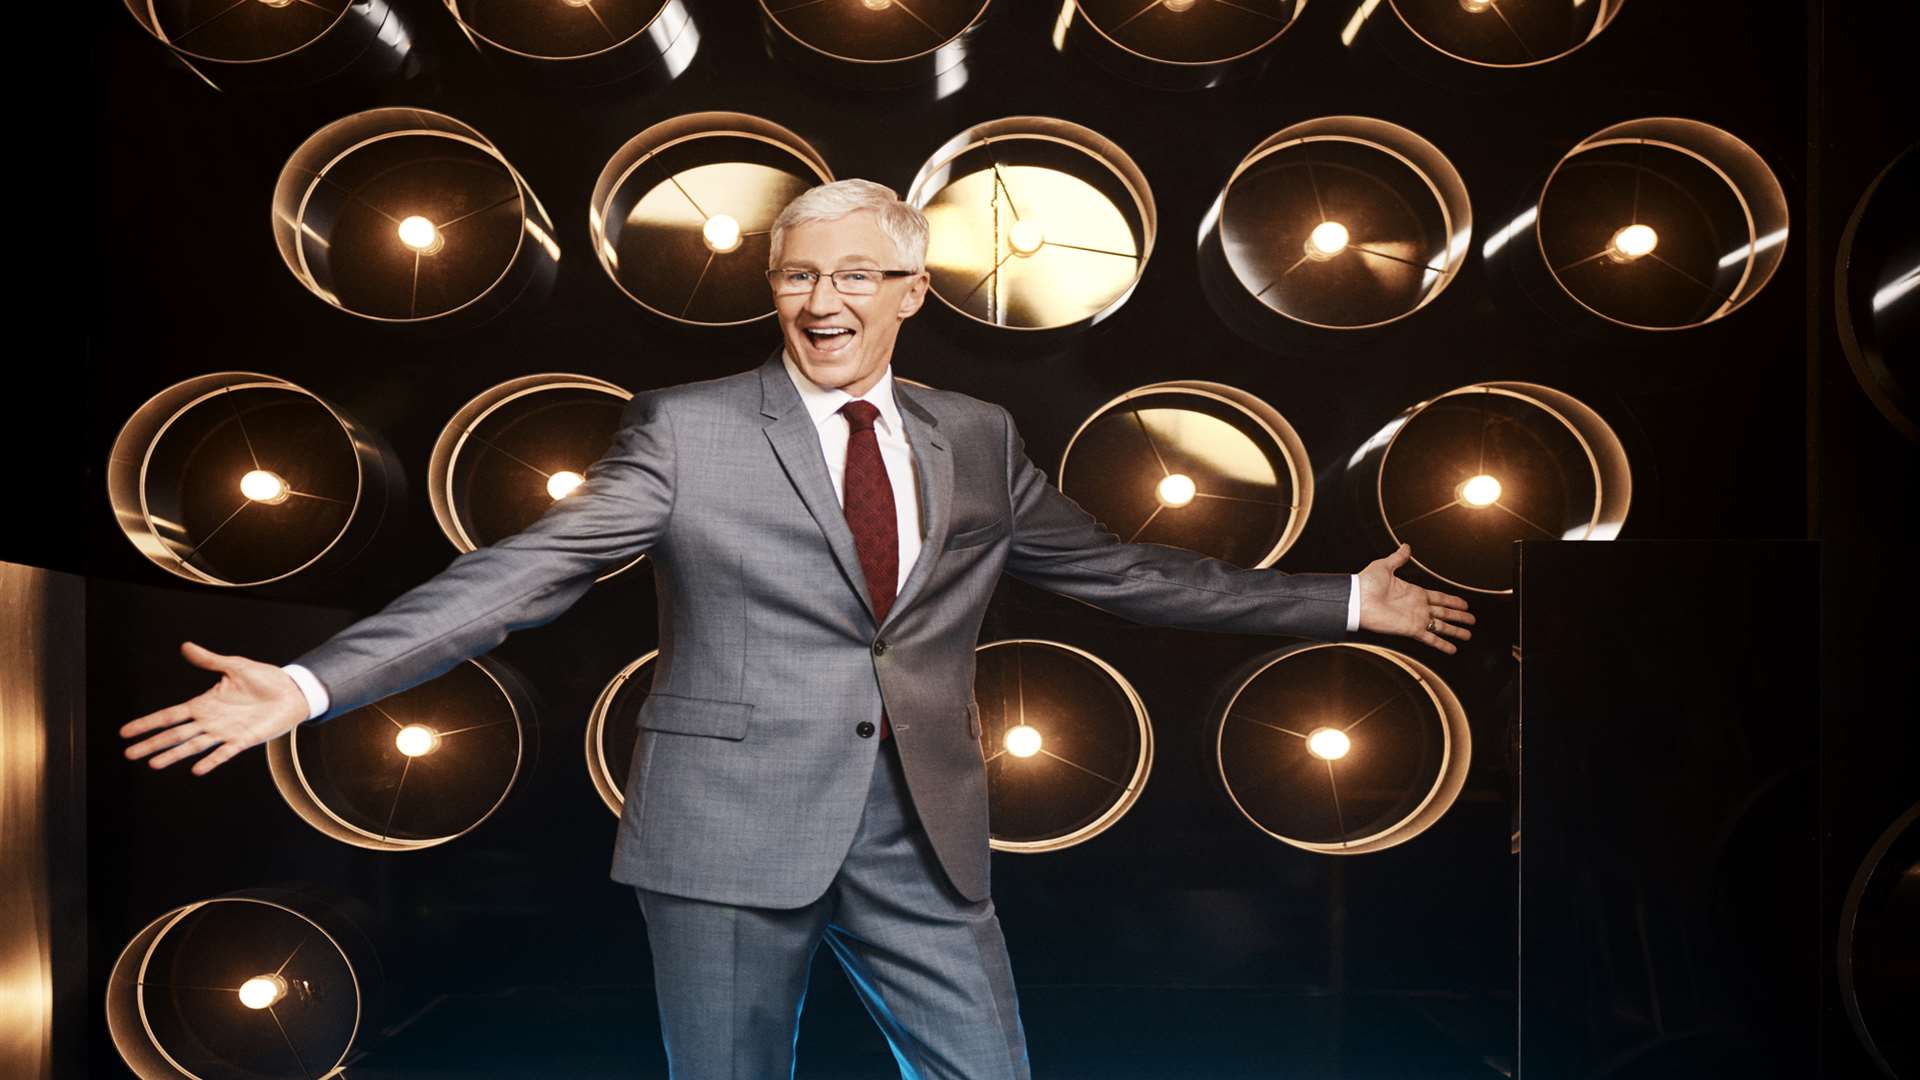 Paul O'Grady, who lives in Aldington, is the new host of Blind Date